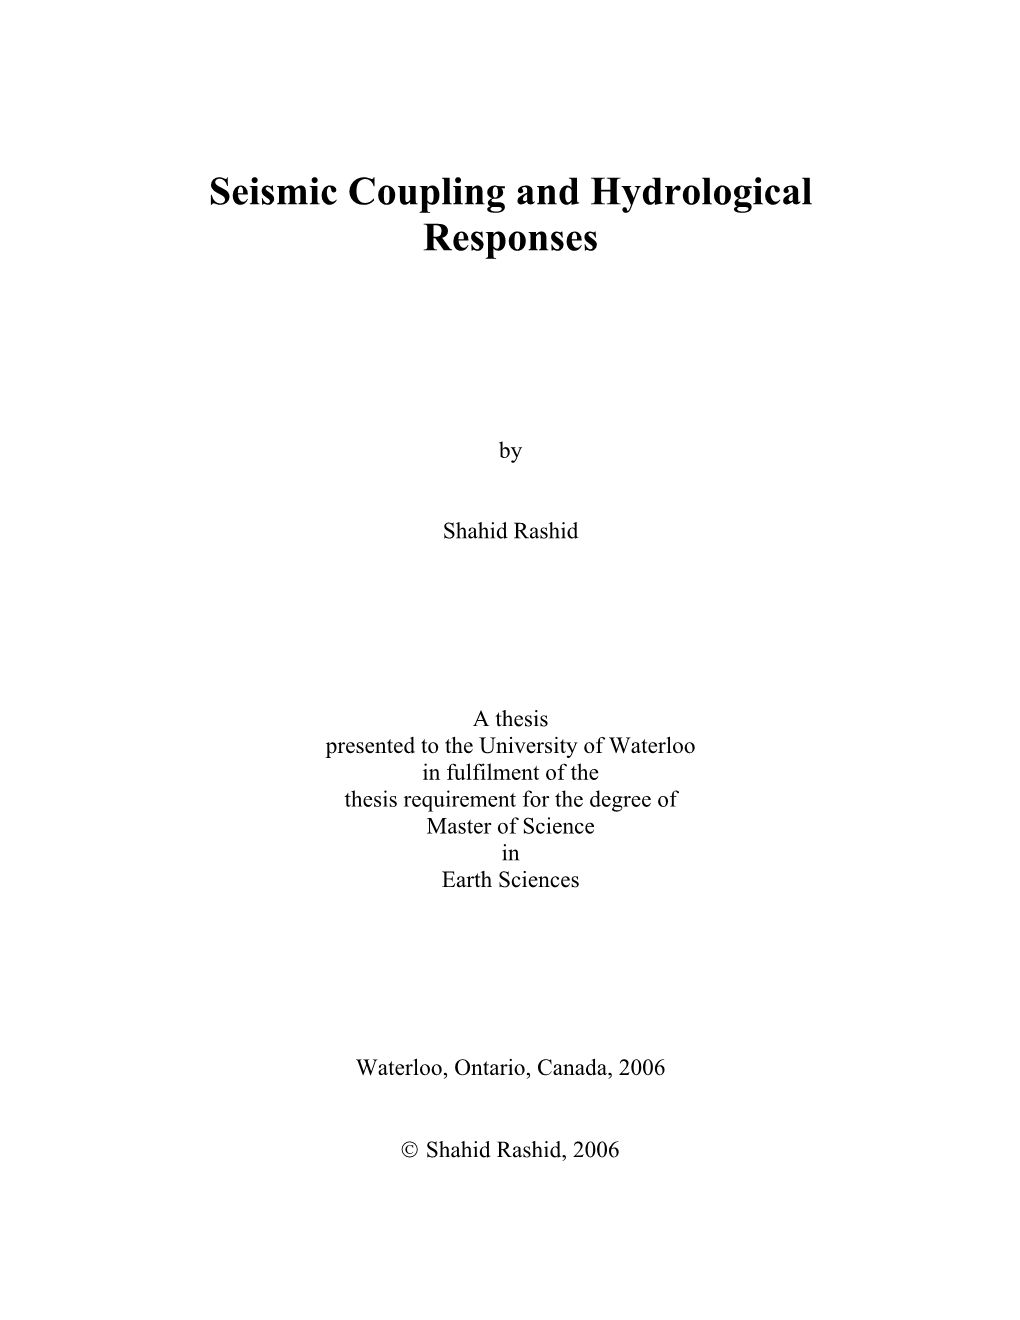 Seismic Coupling and Hydrological Responses